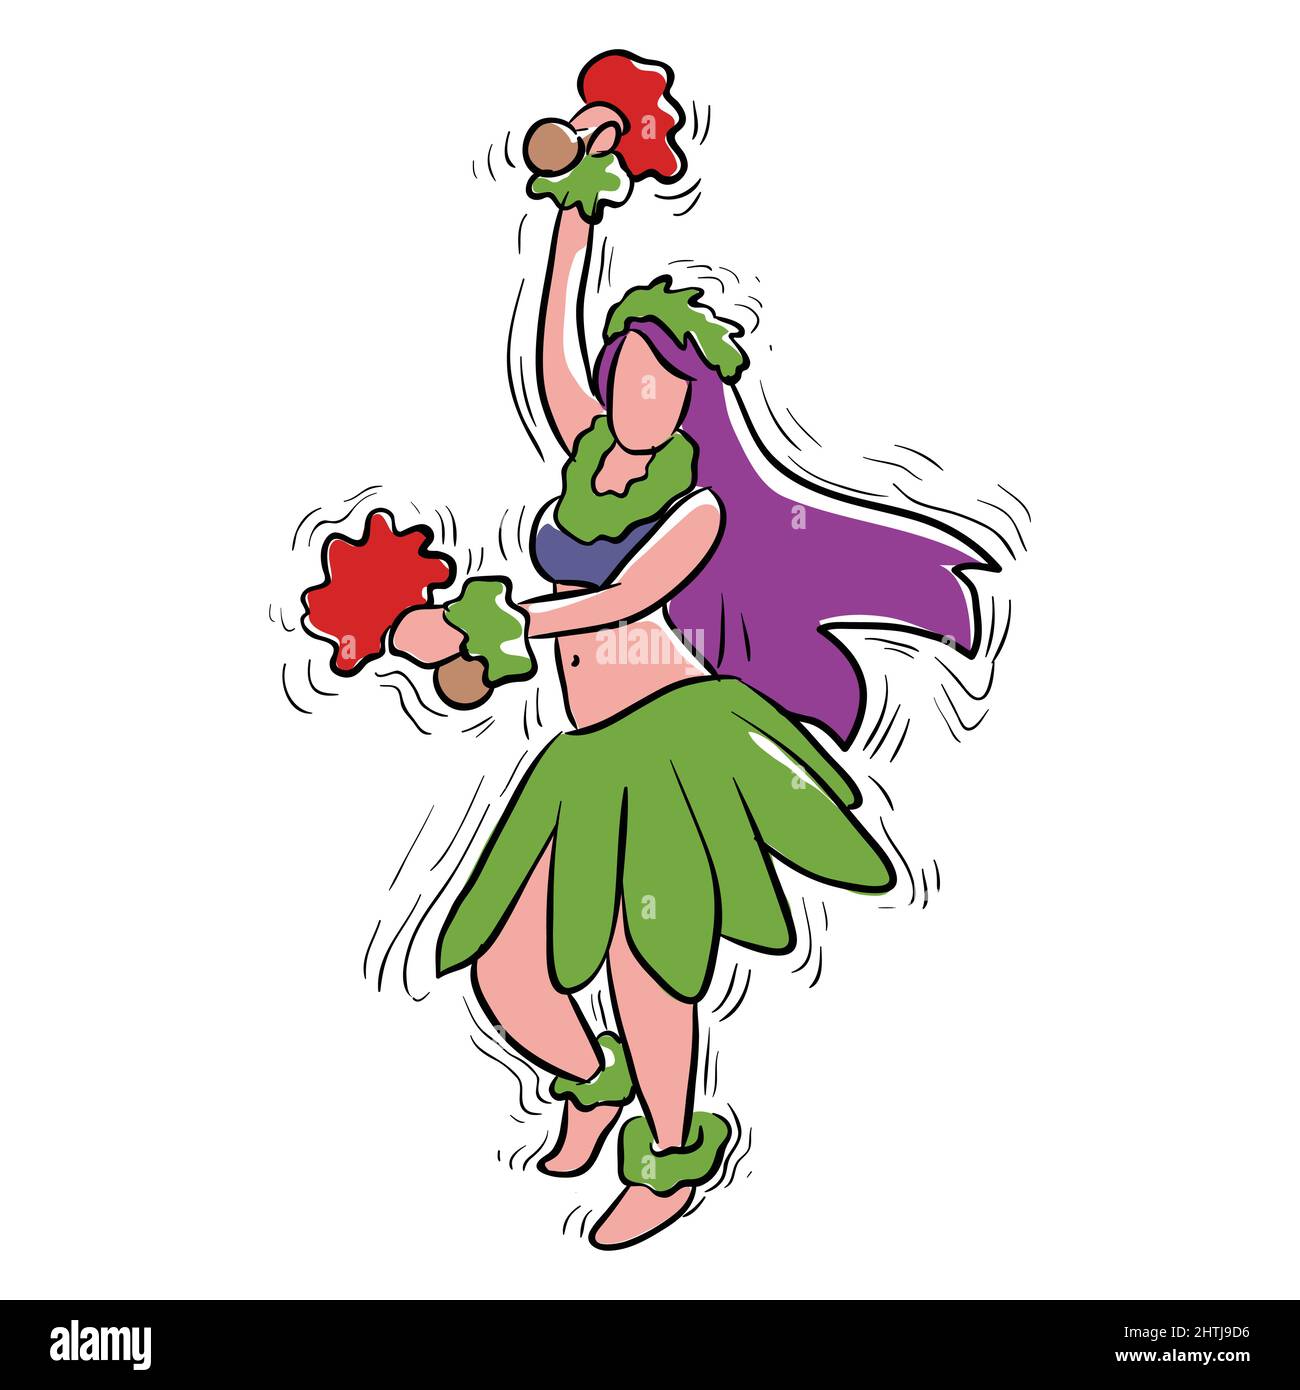 Hula dancer vector illustration isolated in white background Stock Vector